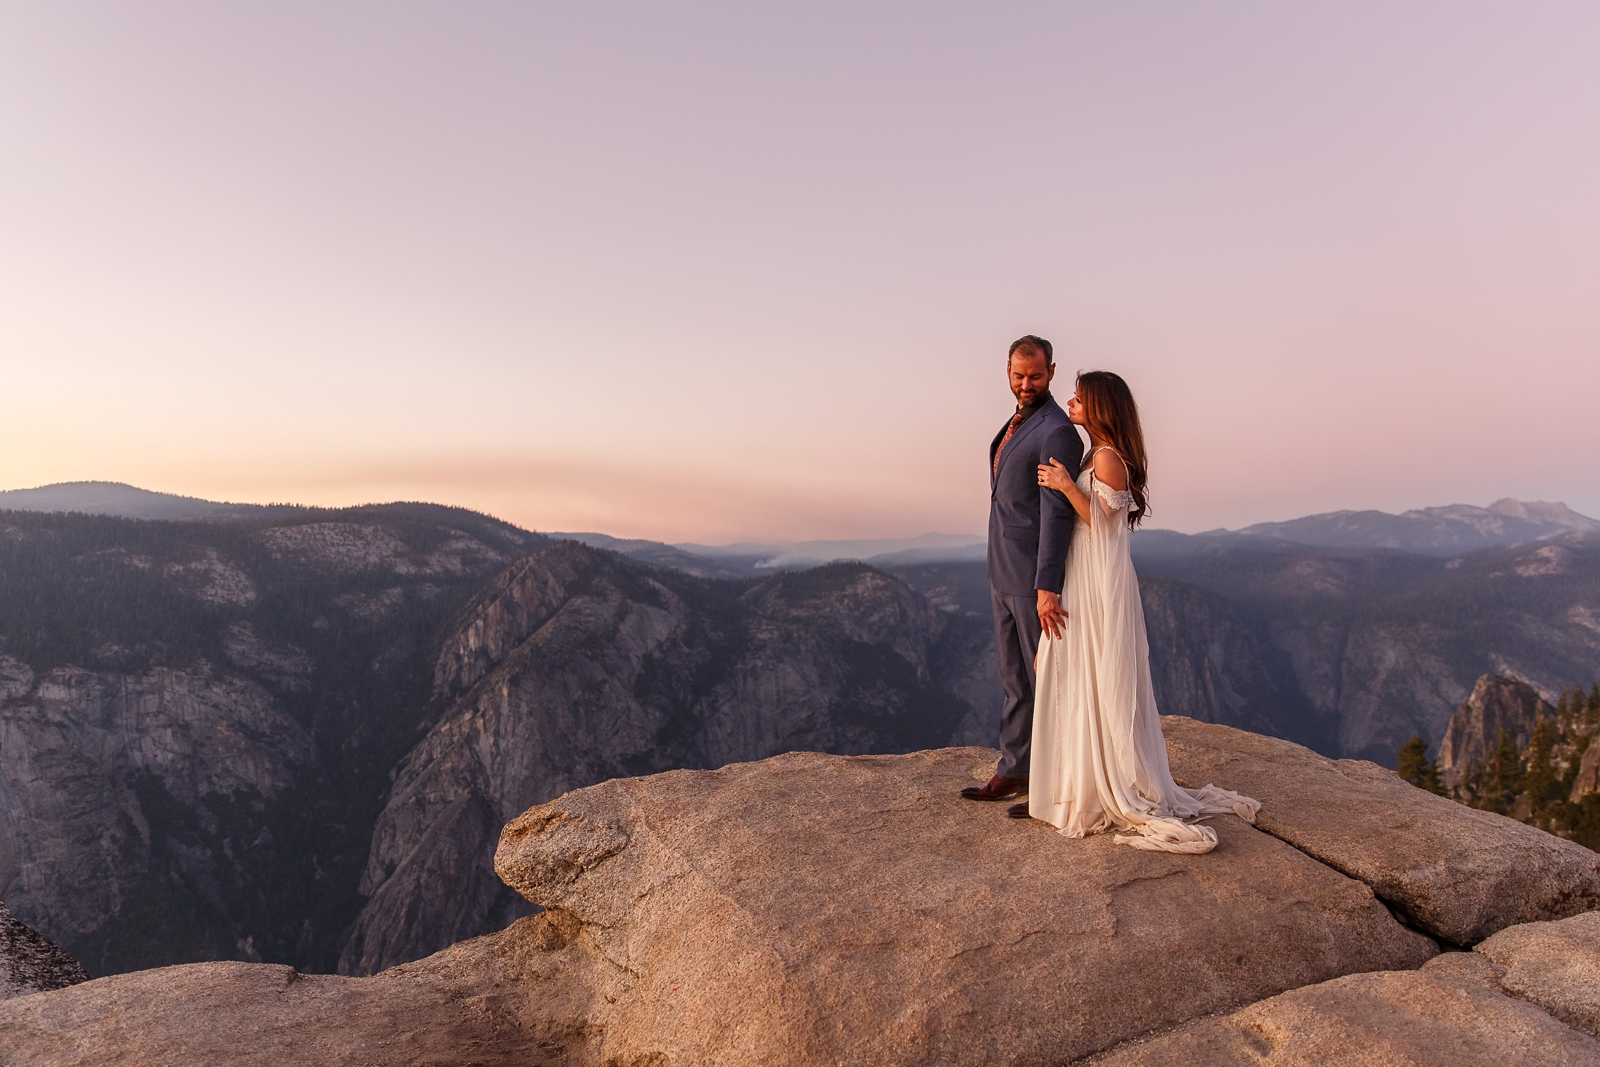 Gorgeous eloping couple at sunset in Yosemite National Park.